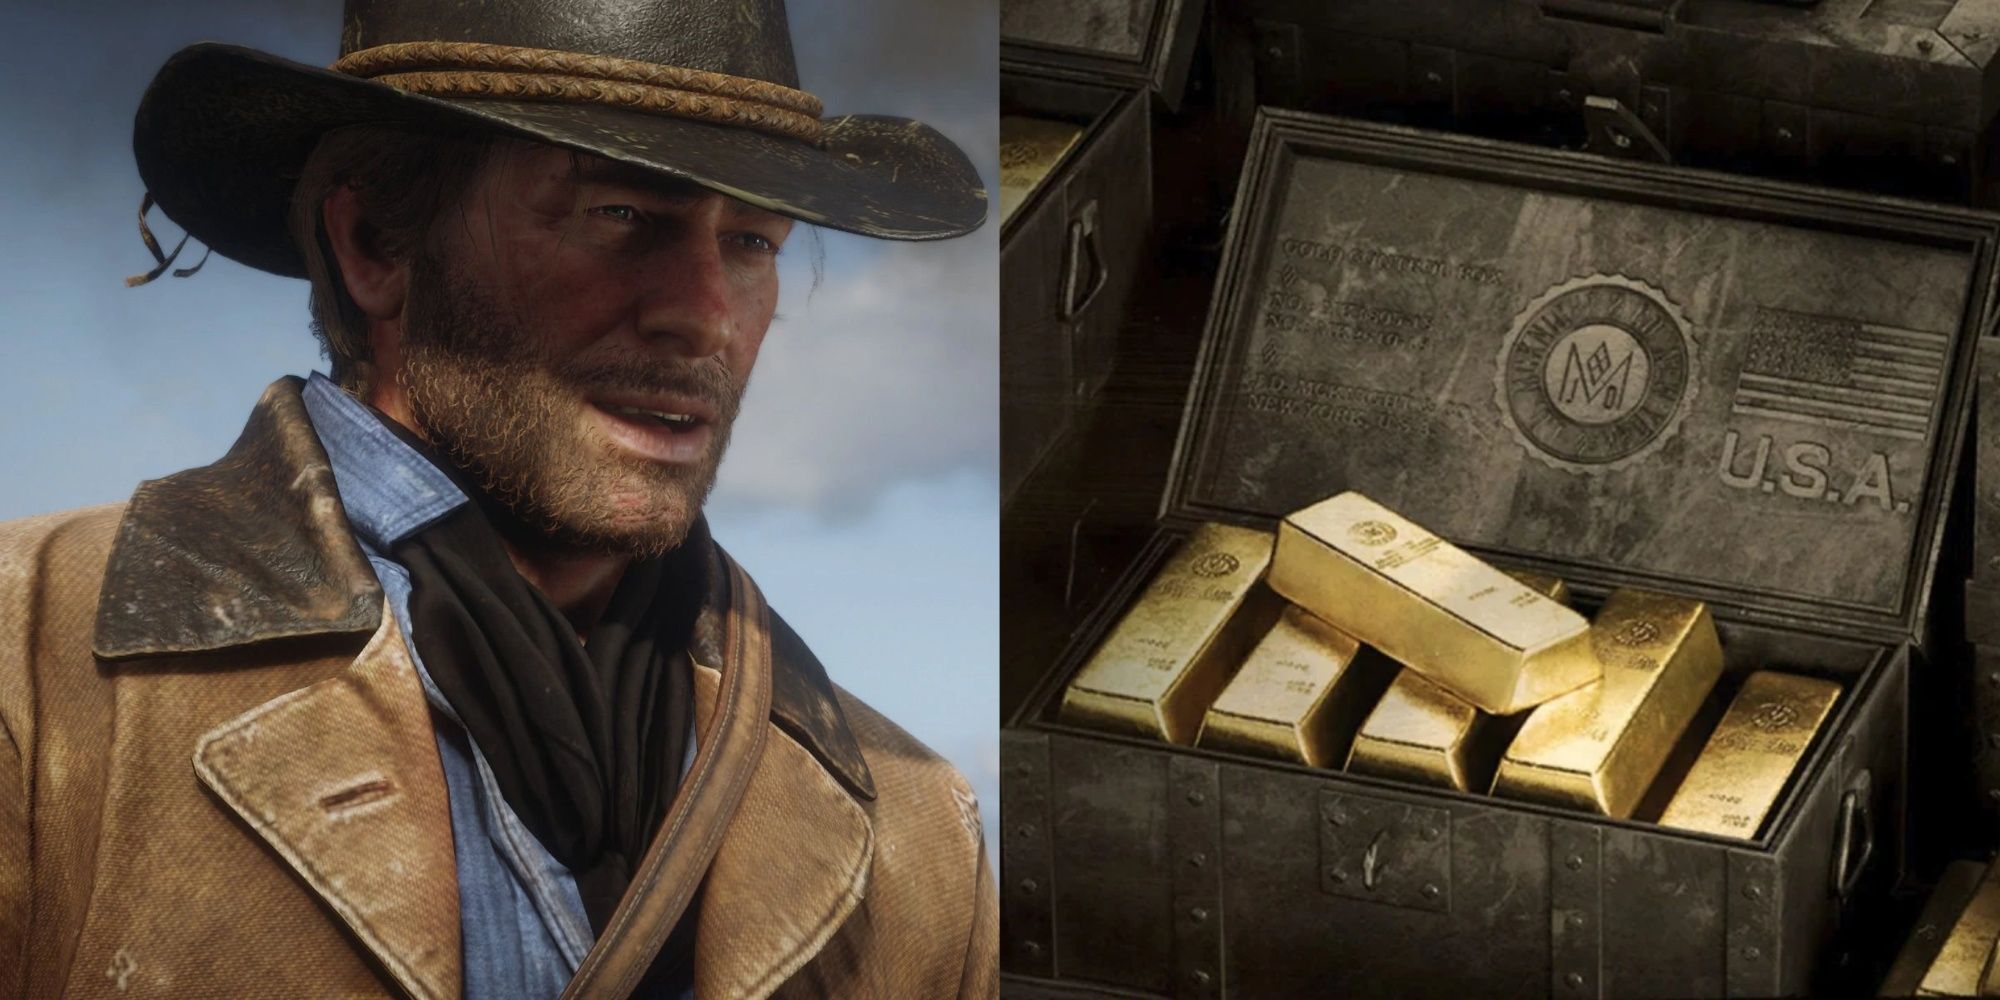 Split image showing arthur from red dead redemption 2 and a box full of gold bars